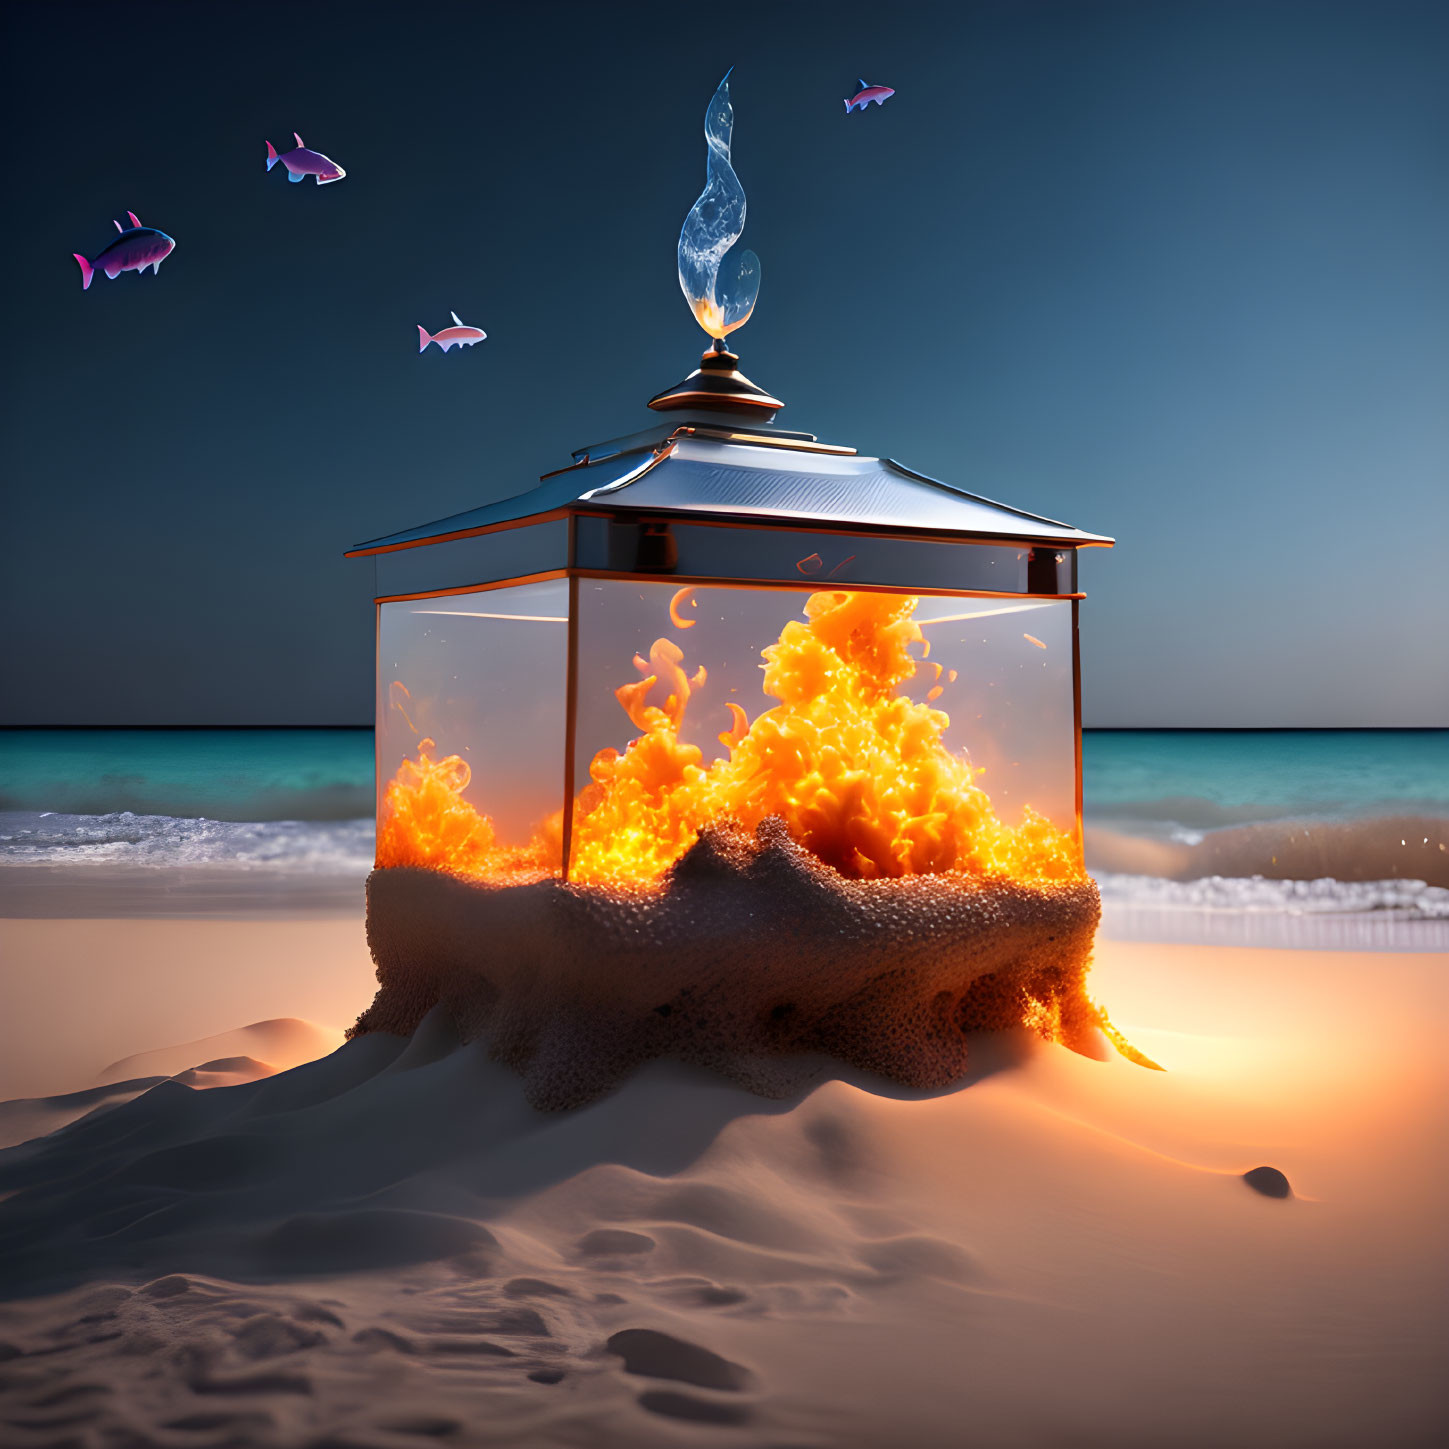 Surreal image: lantern with fiery explosion on sandy beach at twilight with flying fish